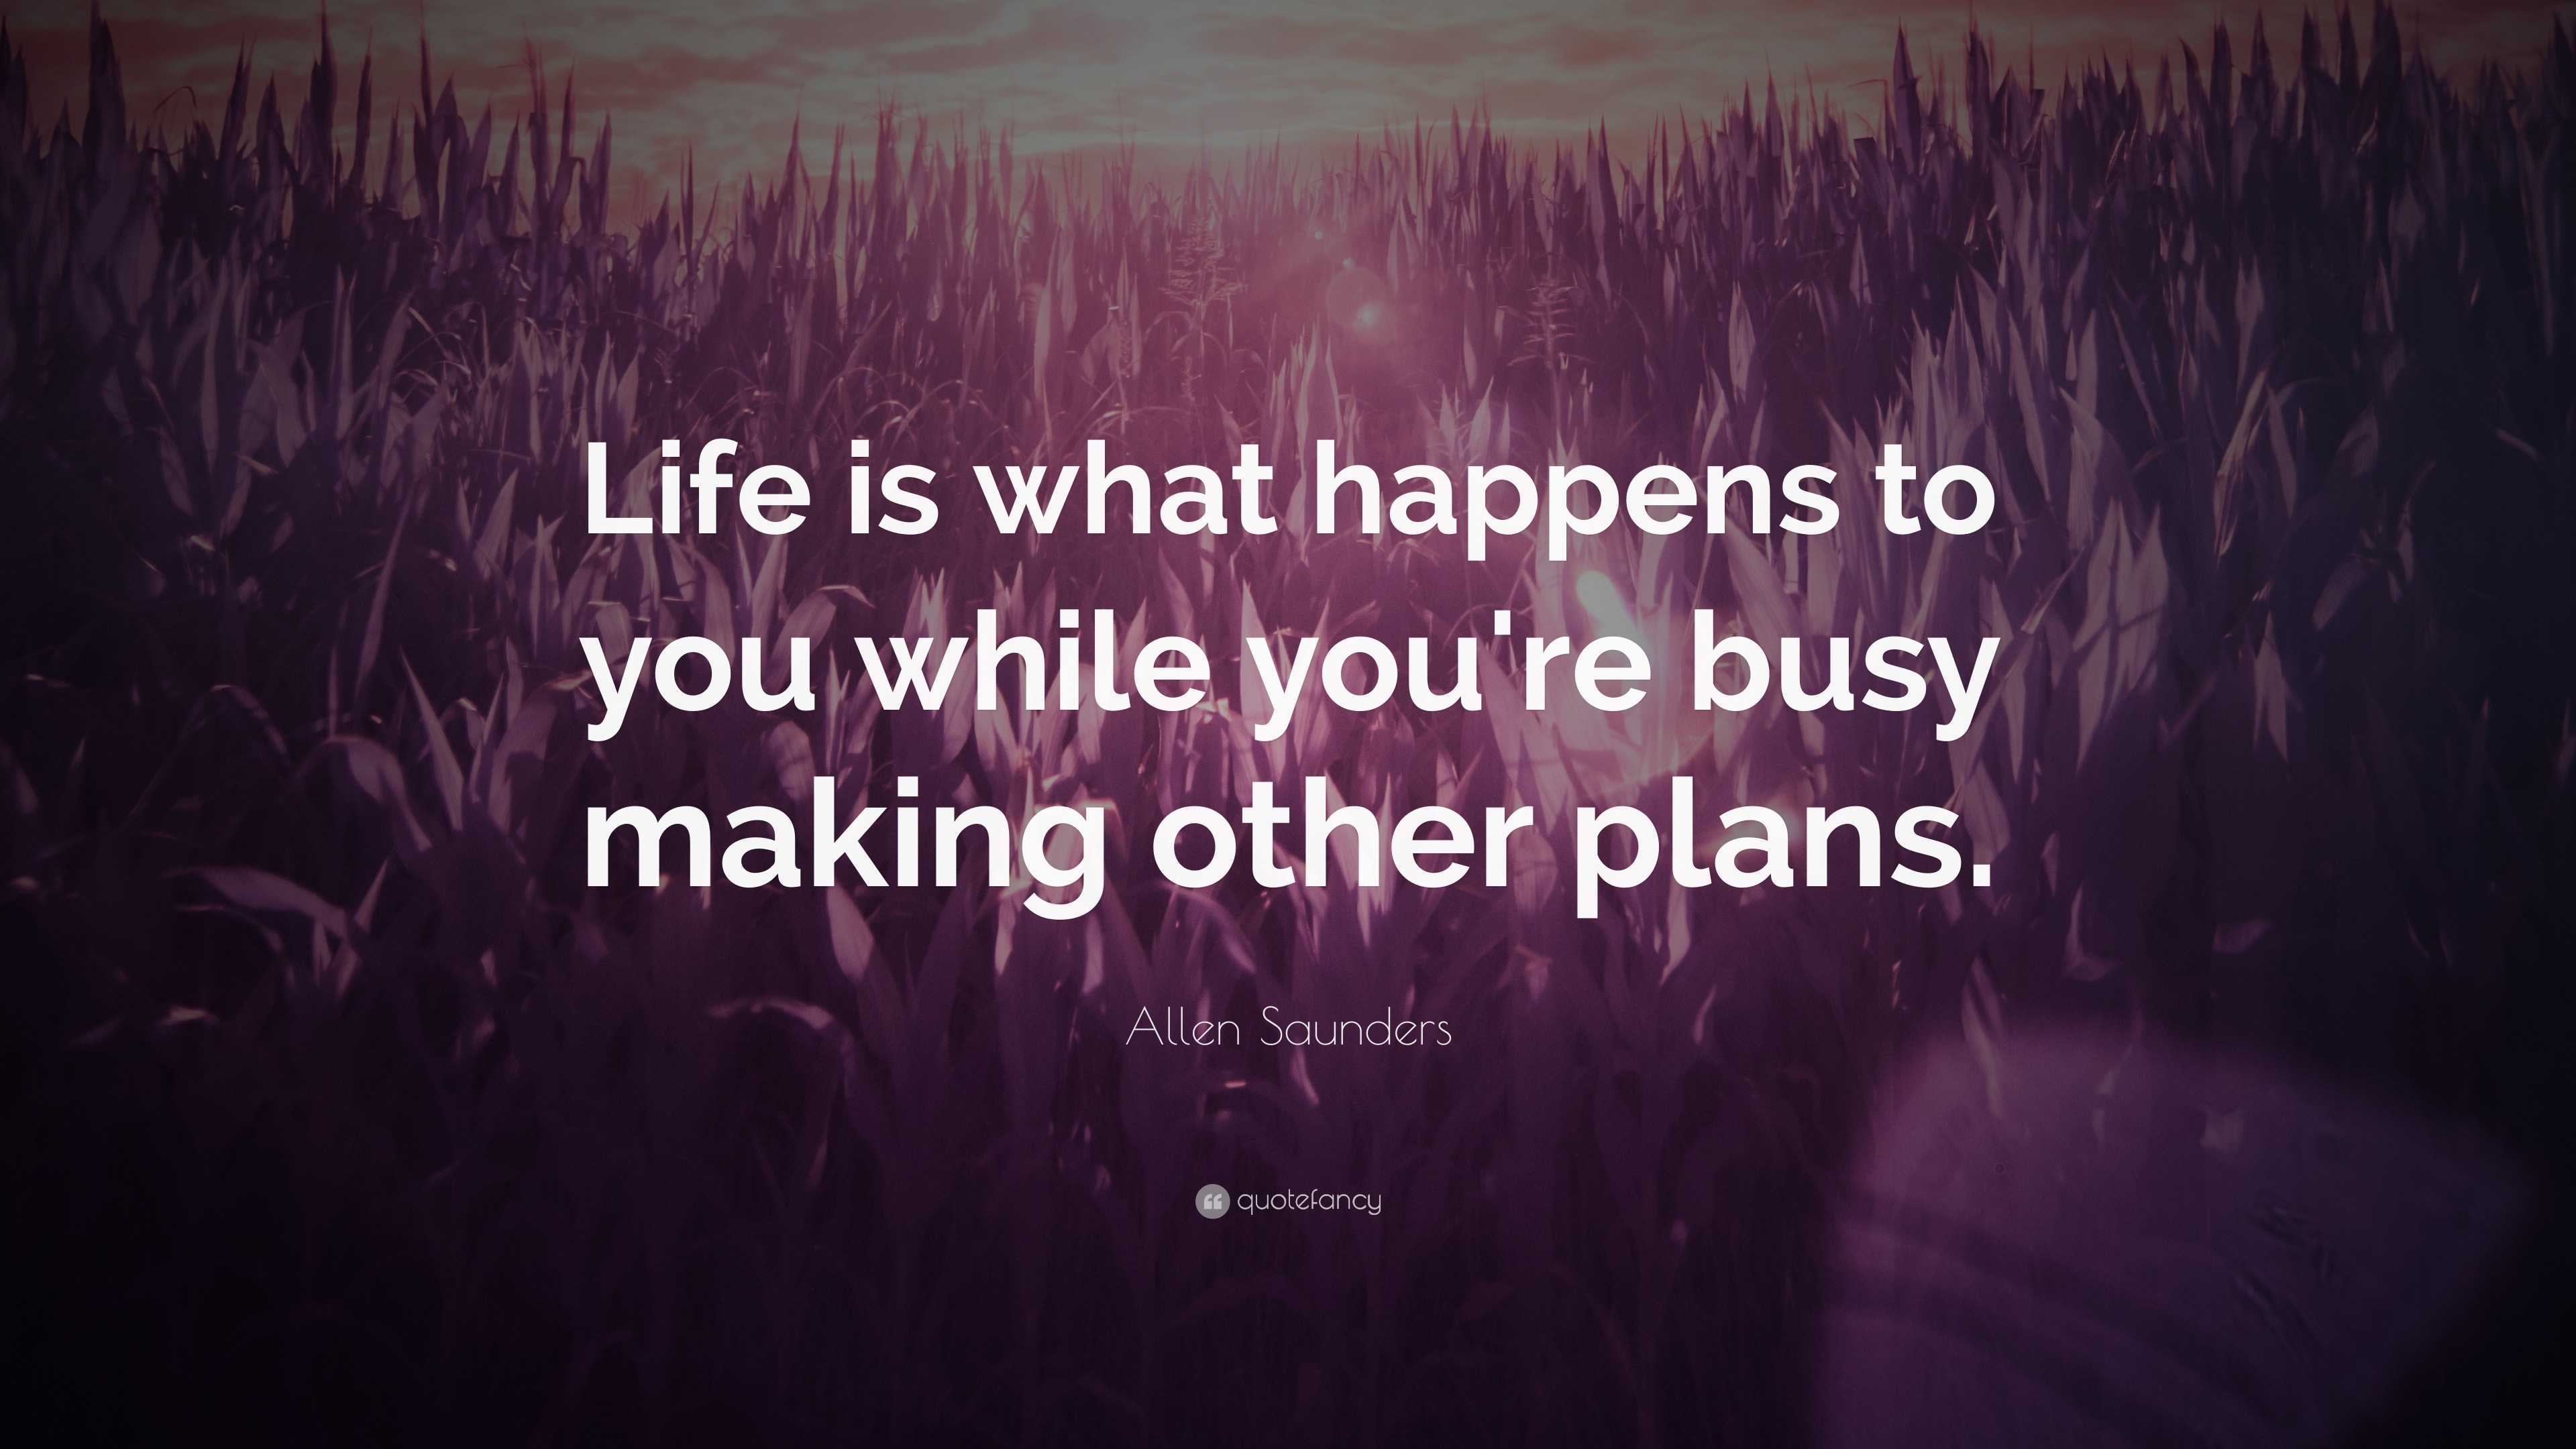 Allen Saunders Quote “Life is what happens to you while